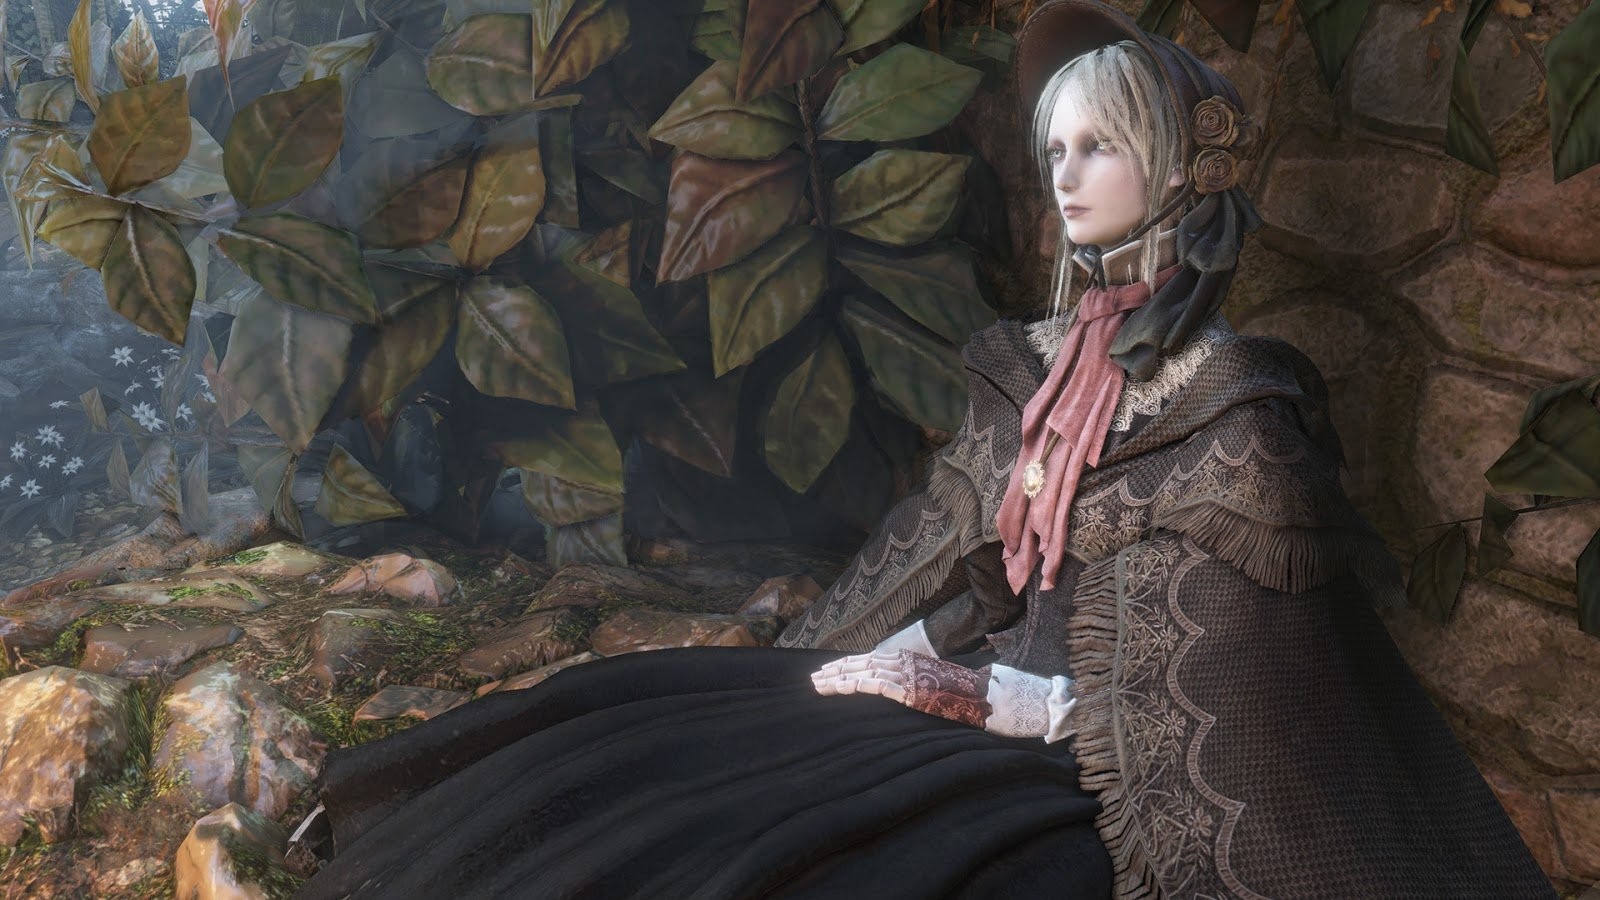 The Doll is a benevolent, gentle, but mysterious NPC in Bloodborne. Image credit: FromSoftware